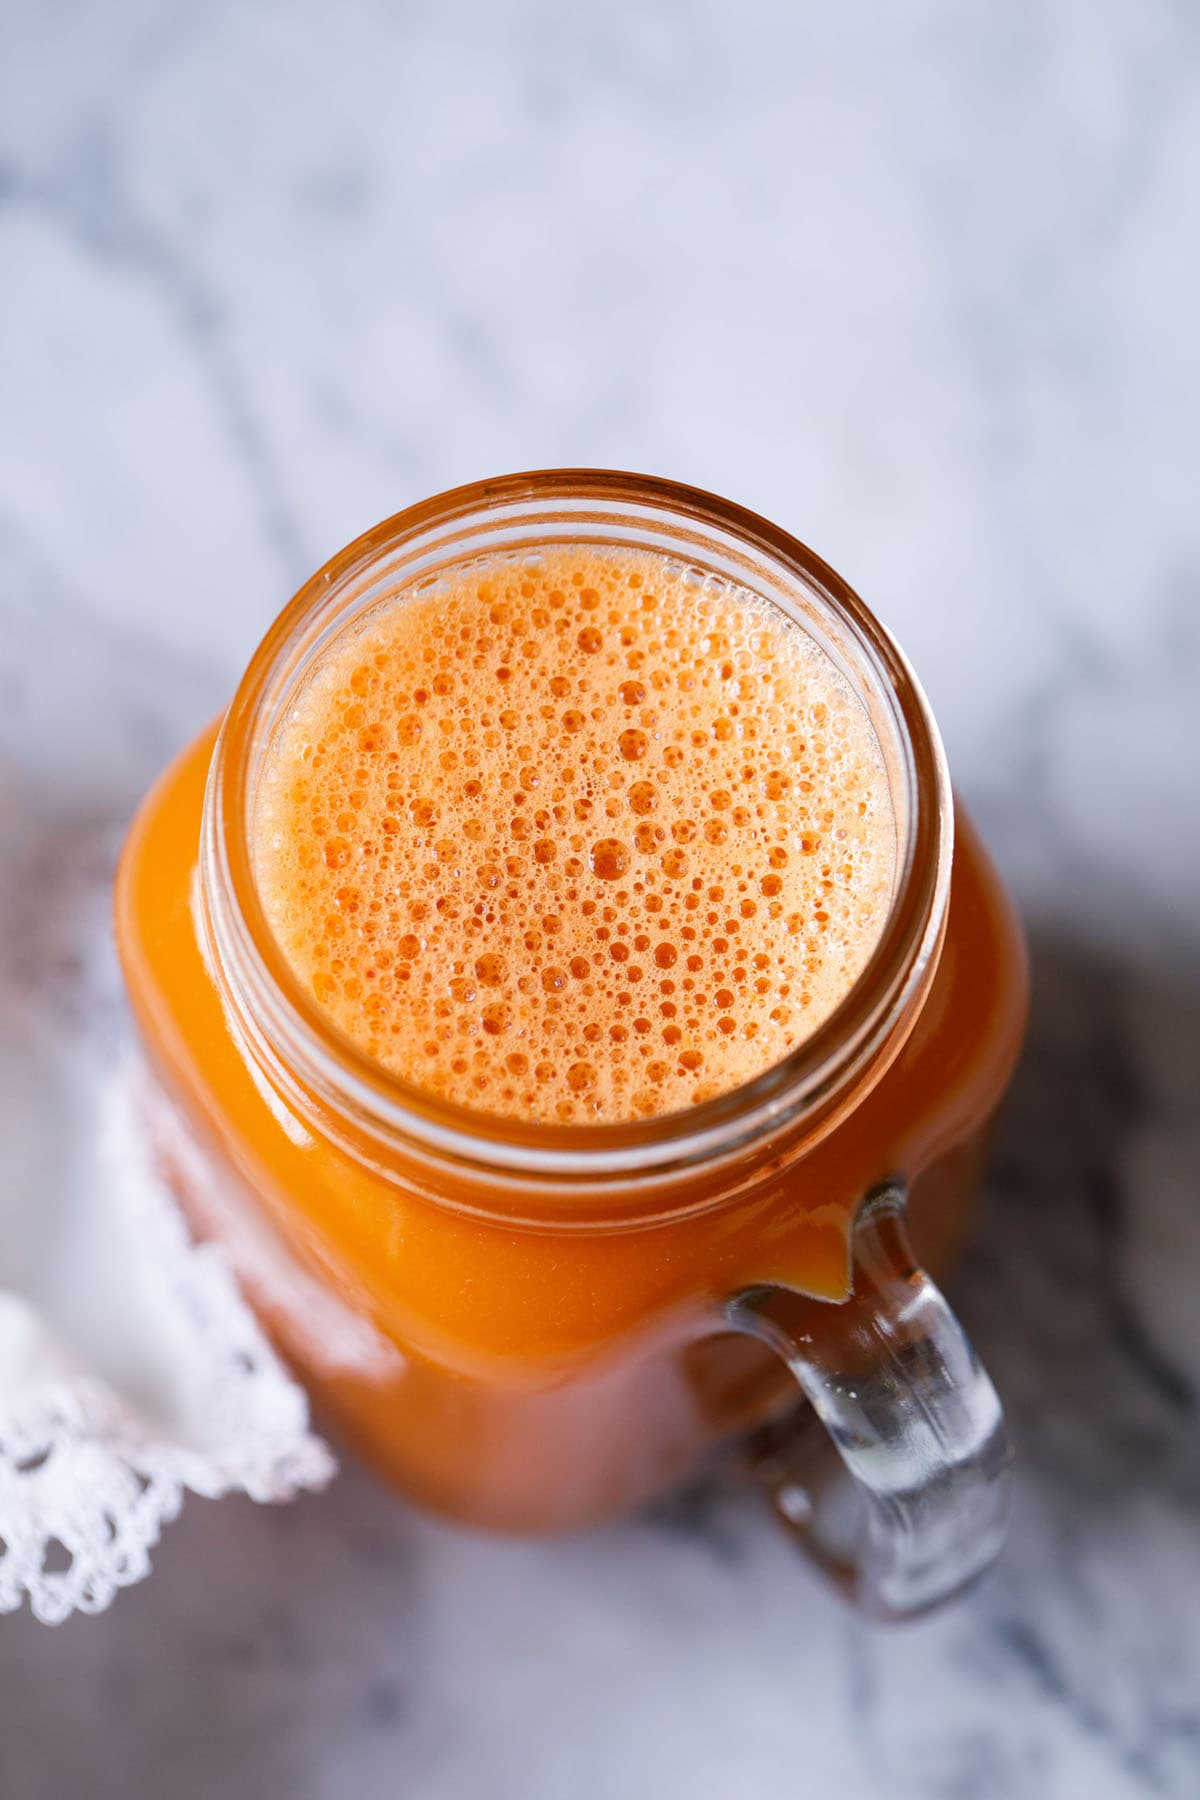 carrot juice in a glass jar with a white doily by the side